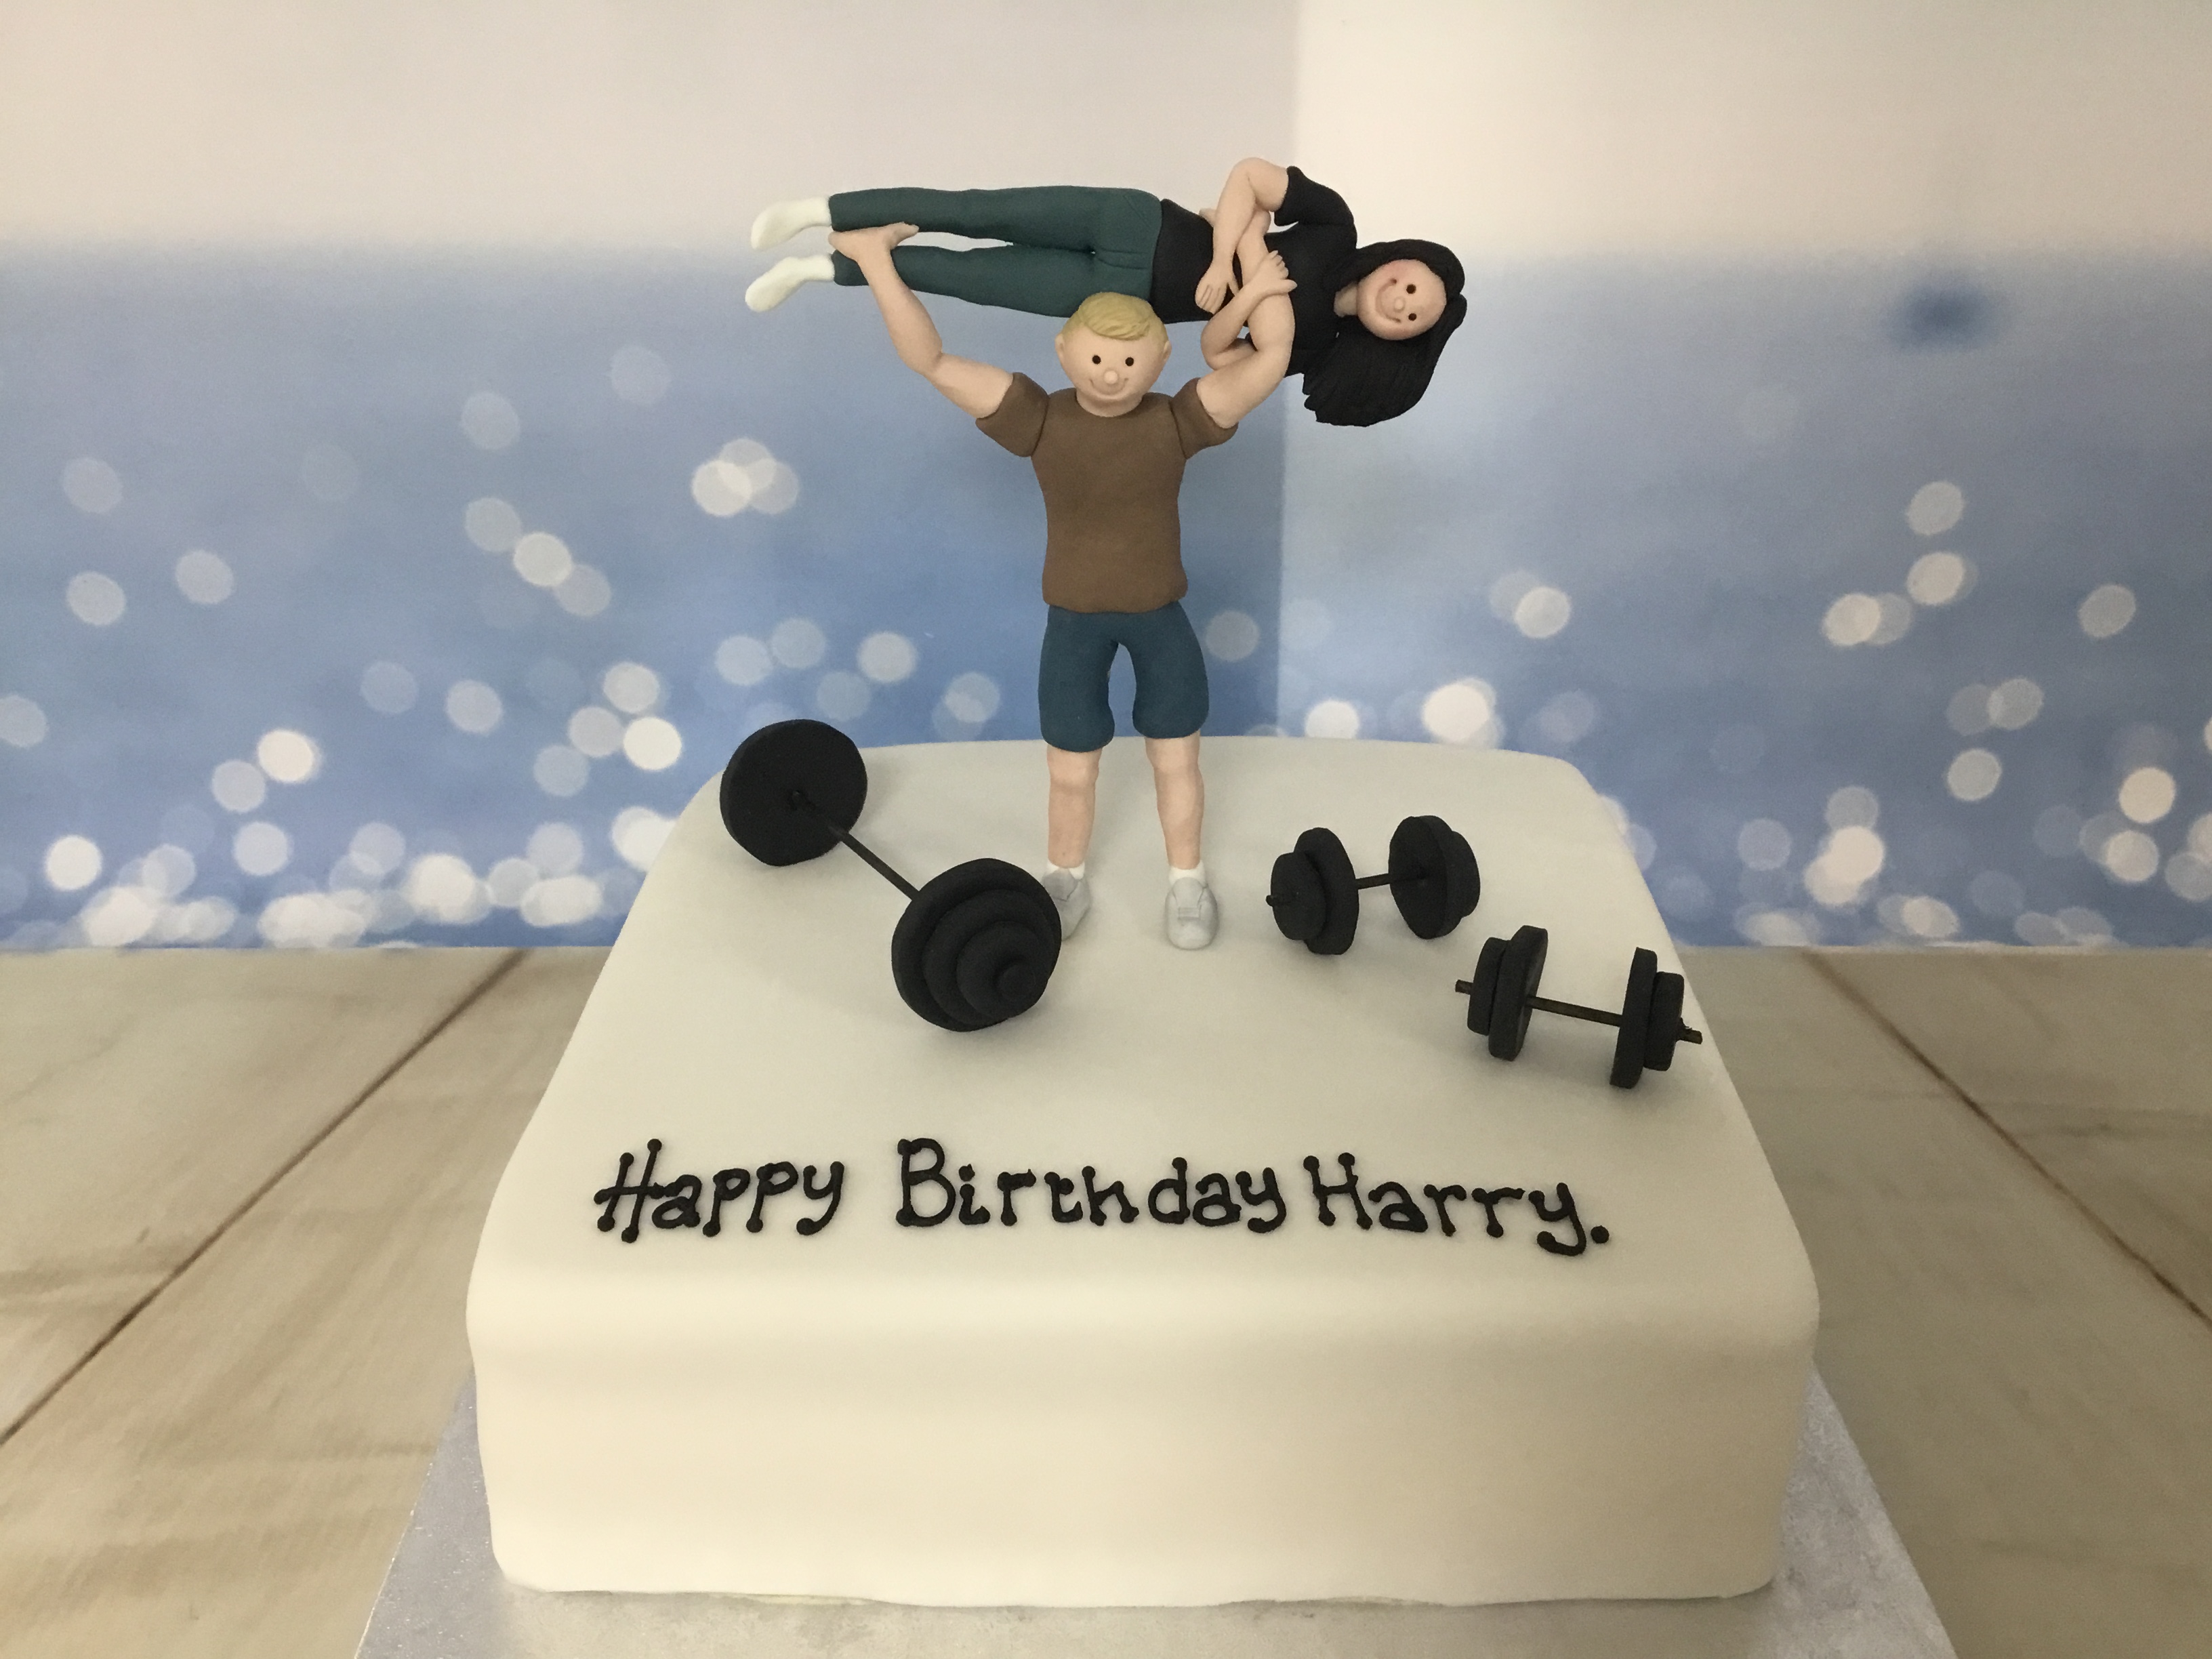 Baker's 13 - A fitness-gym themed cake for a very active young lady  celebrating her hatch day. Design specs had to include 3D elements from her  usual activities, like the treadmill, skipping